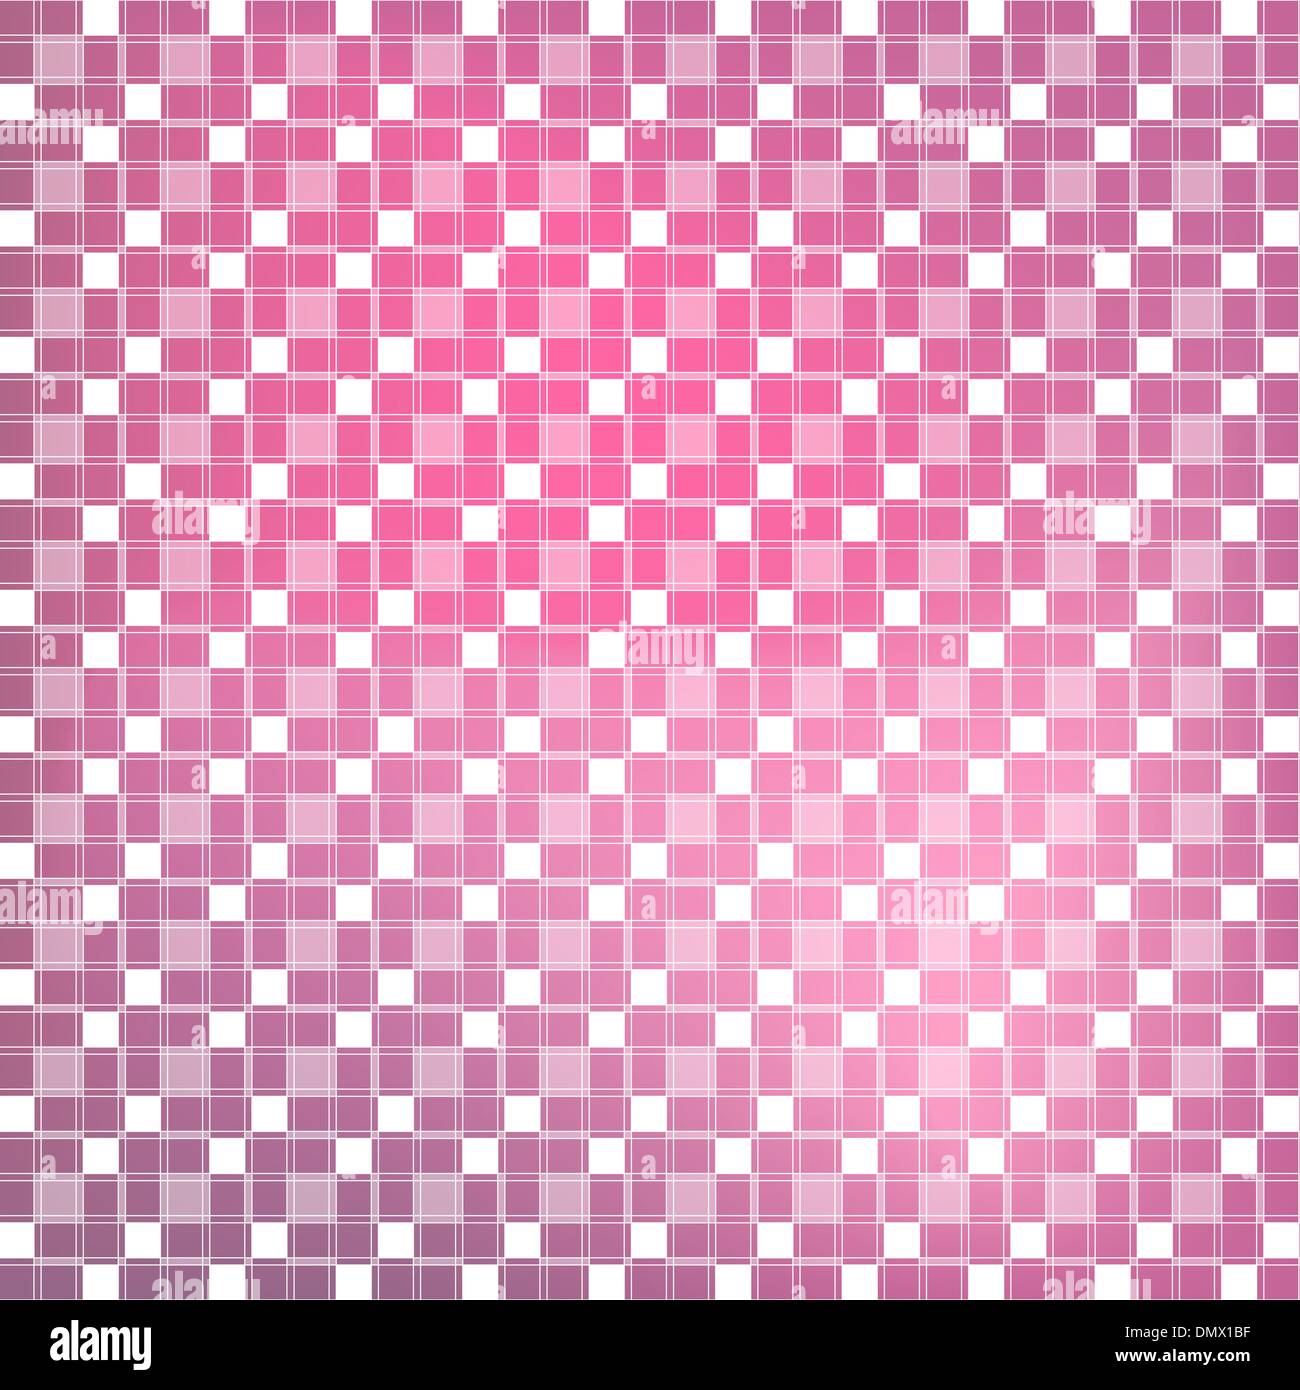 Abstract tile red and pink seamless background. Square pixel mos Stock Vector